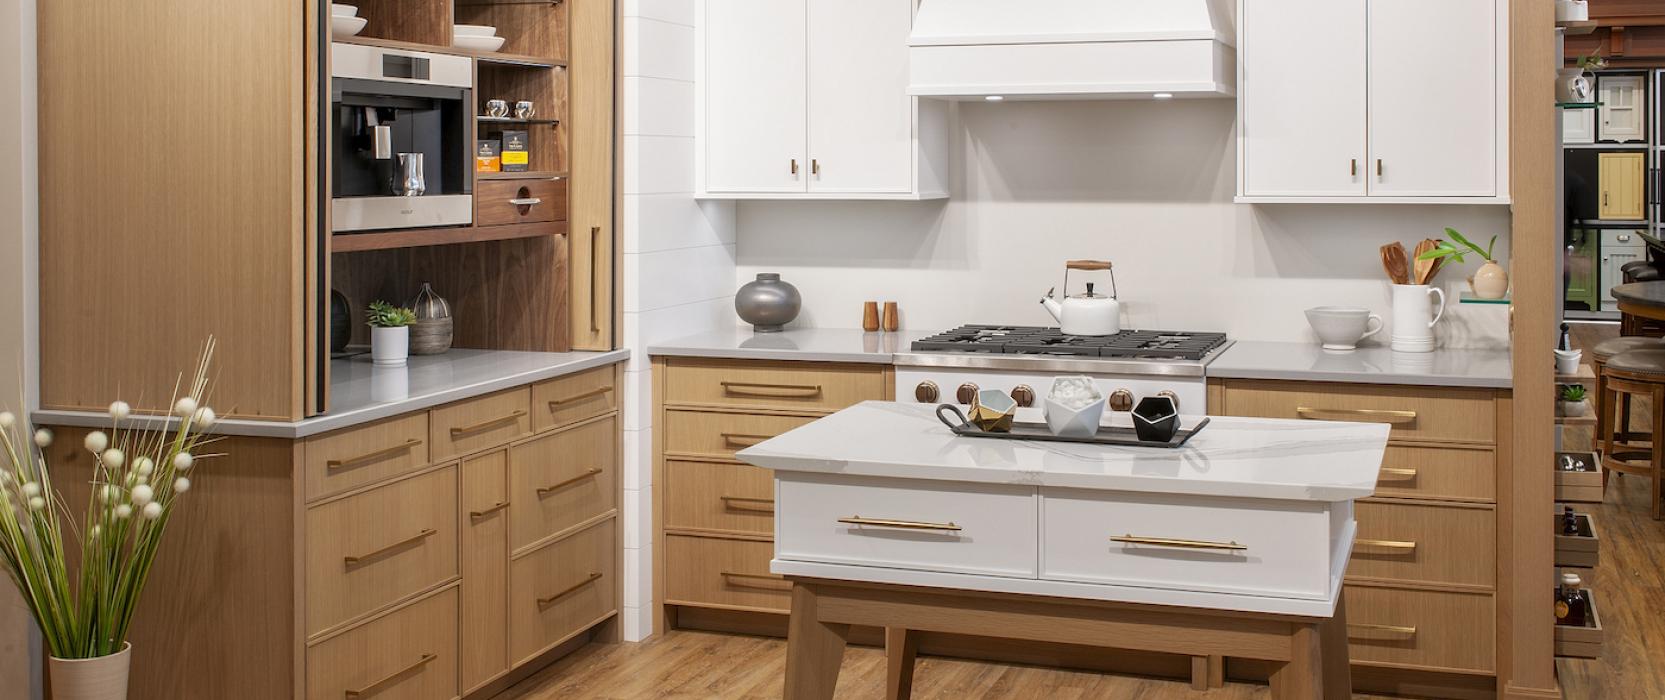 Crown Point Cabinetry, Kitchen Trends